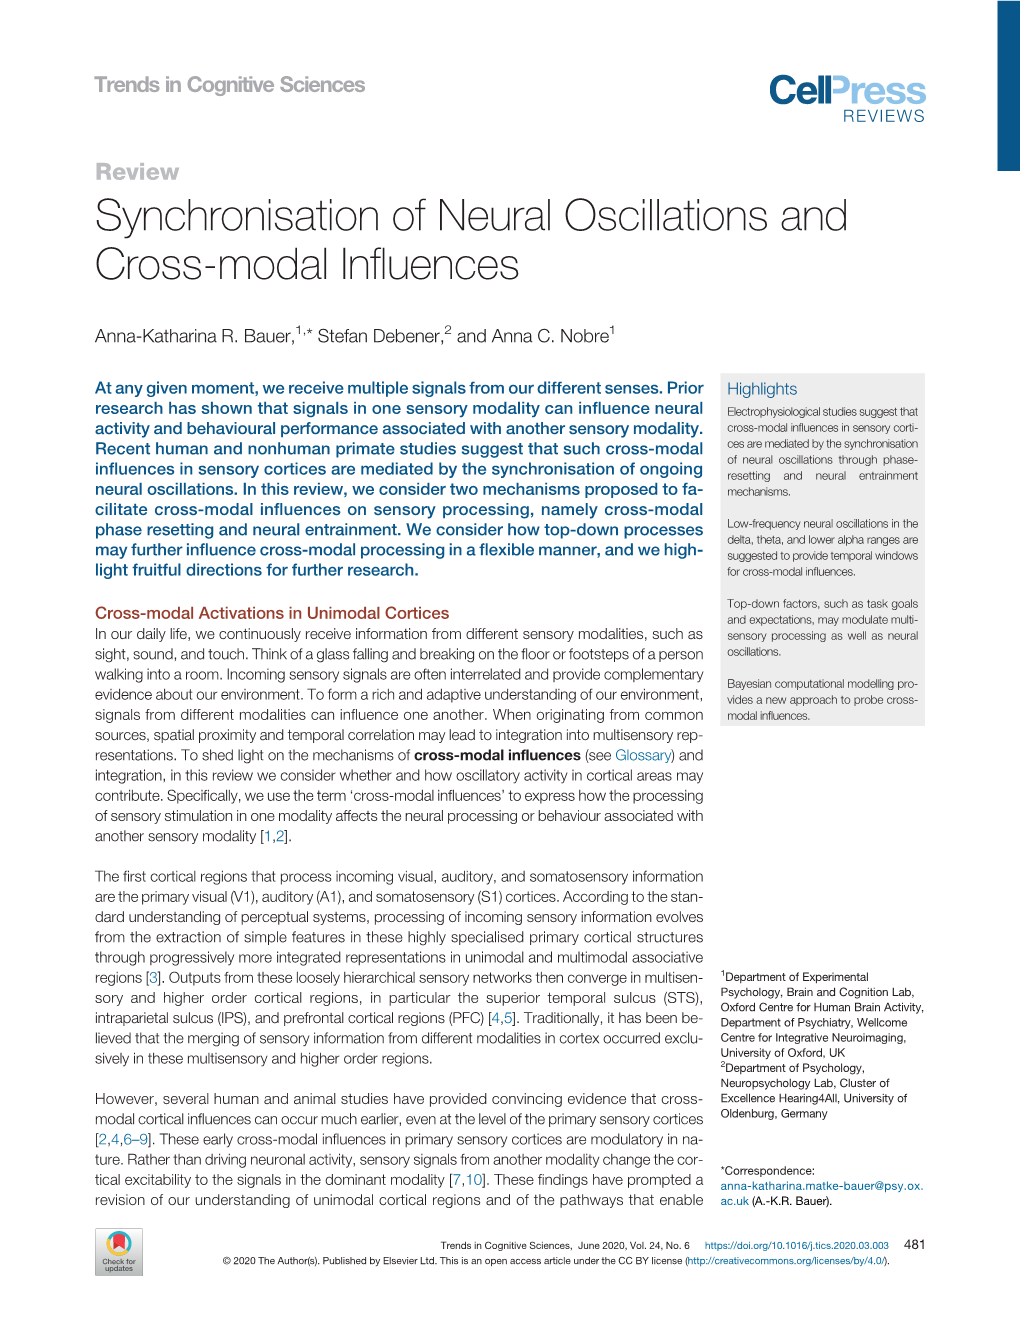 Synchronisation of Neural Oscillations and Cross-Modal Influences